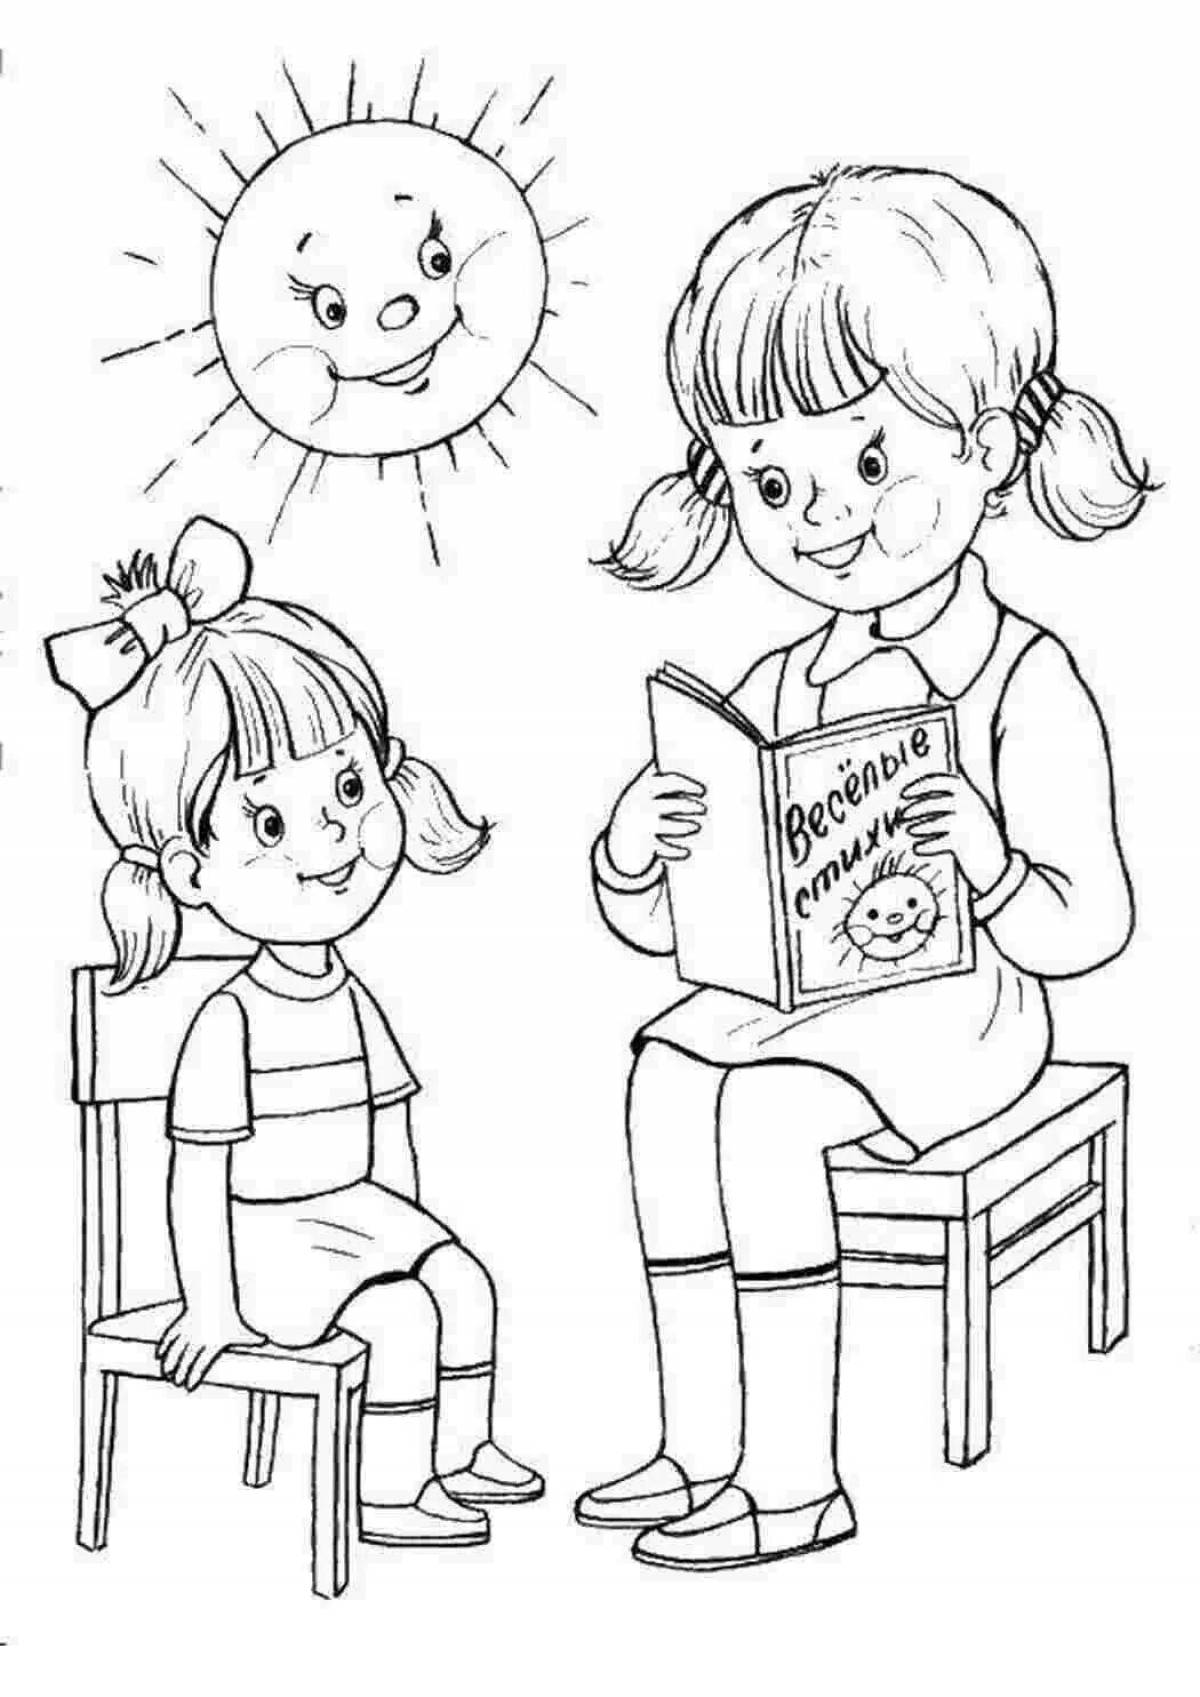 Brilliant kindness coloring page